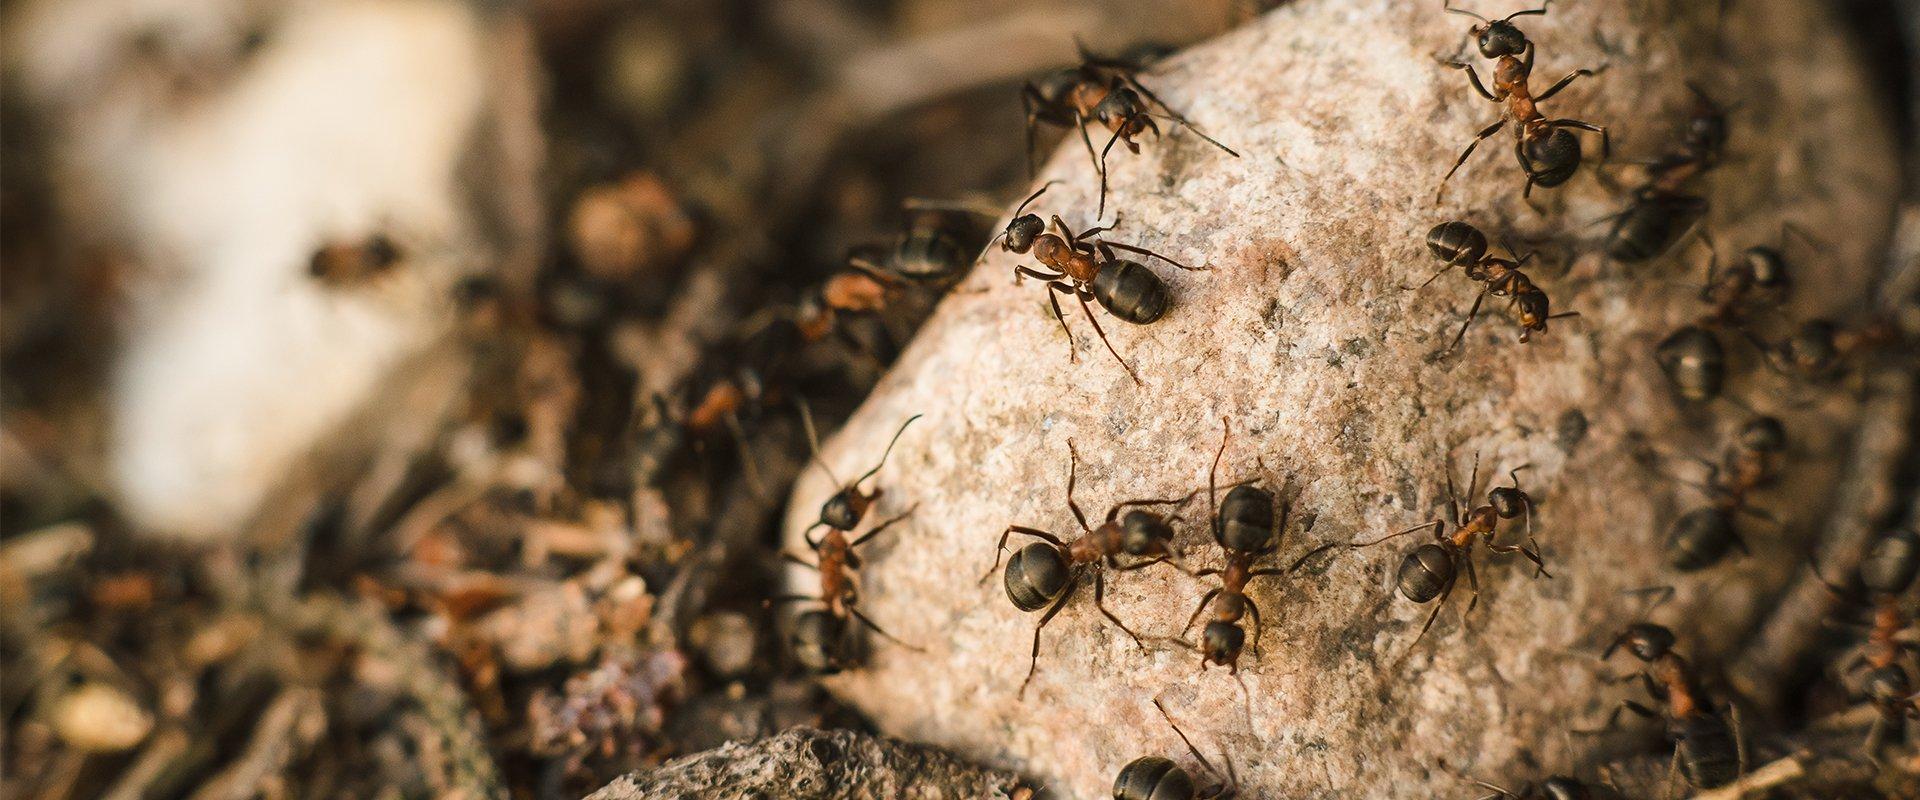 ants crawling on a rock